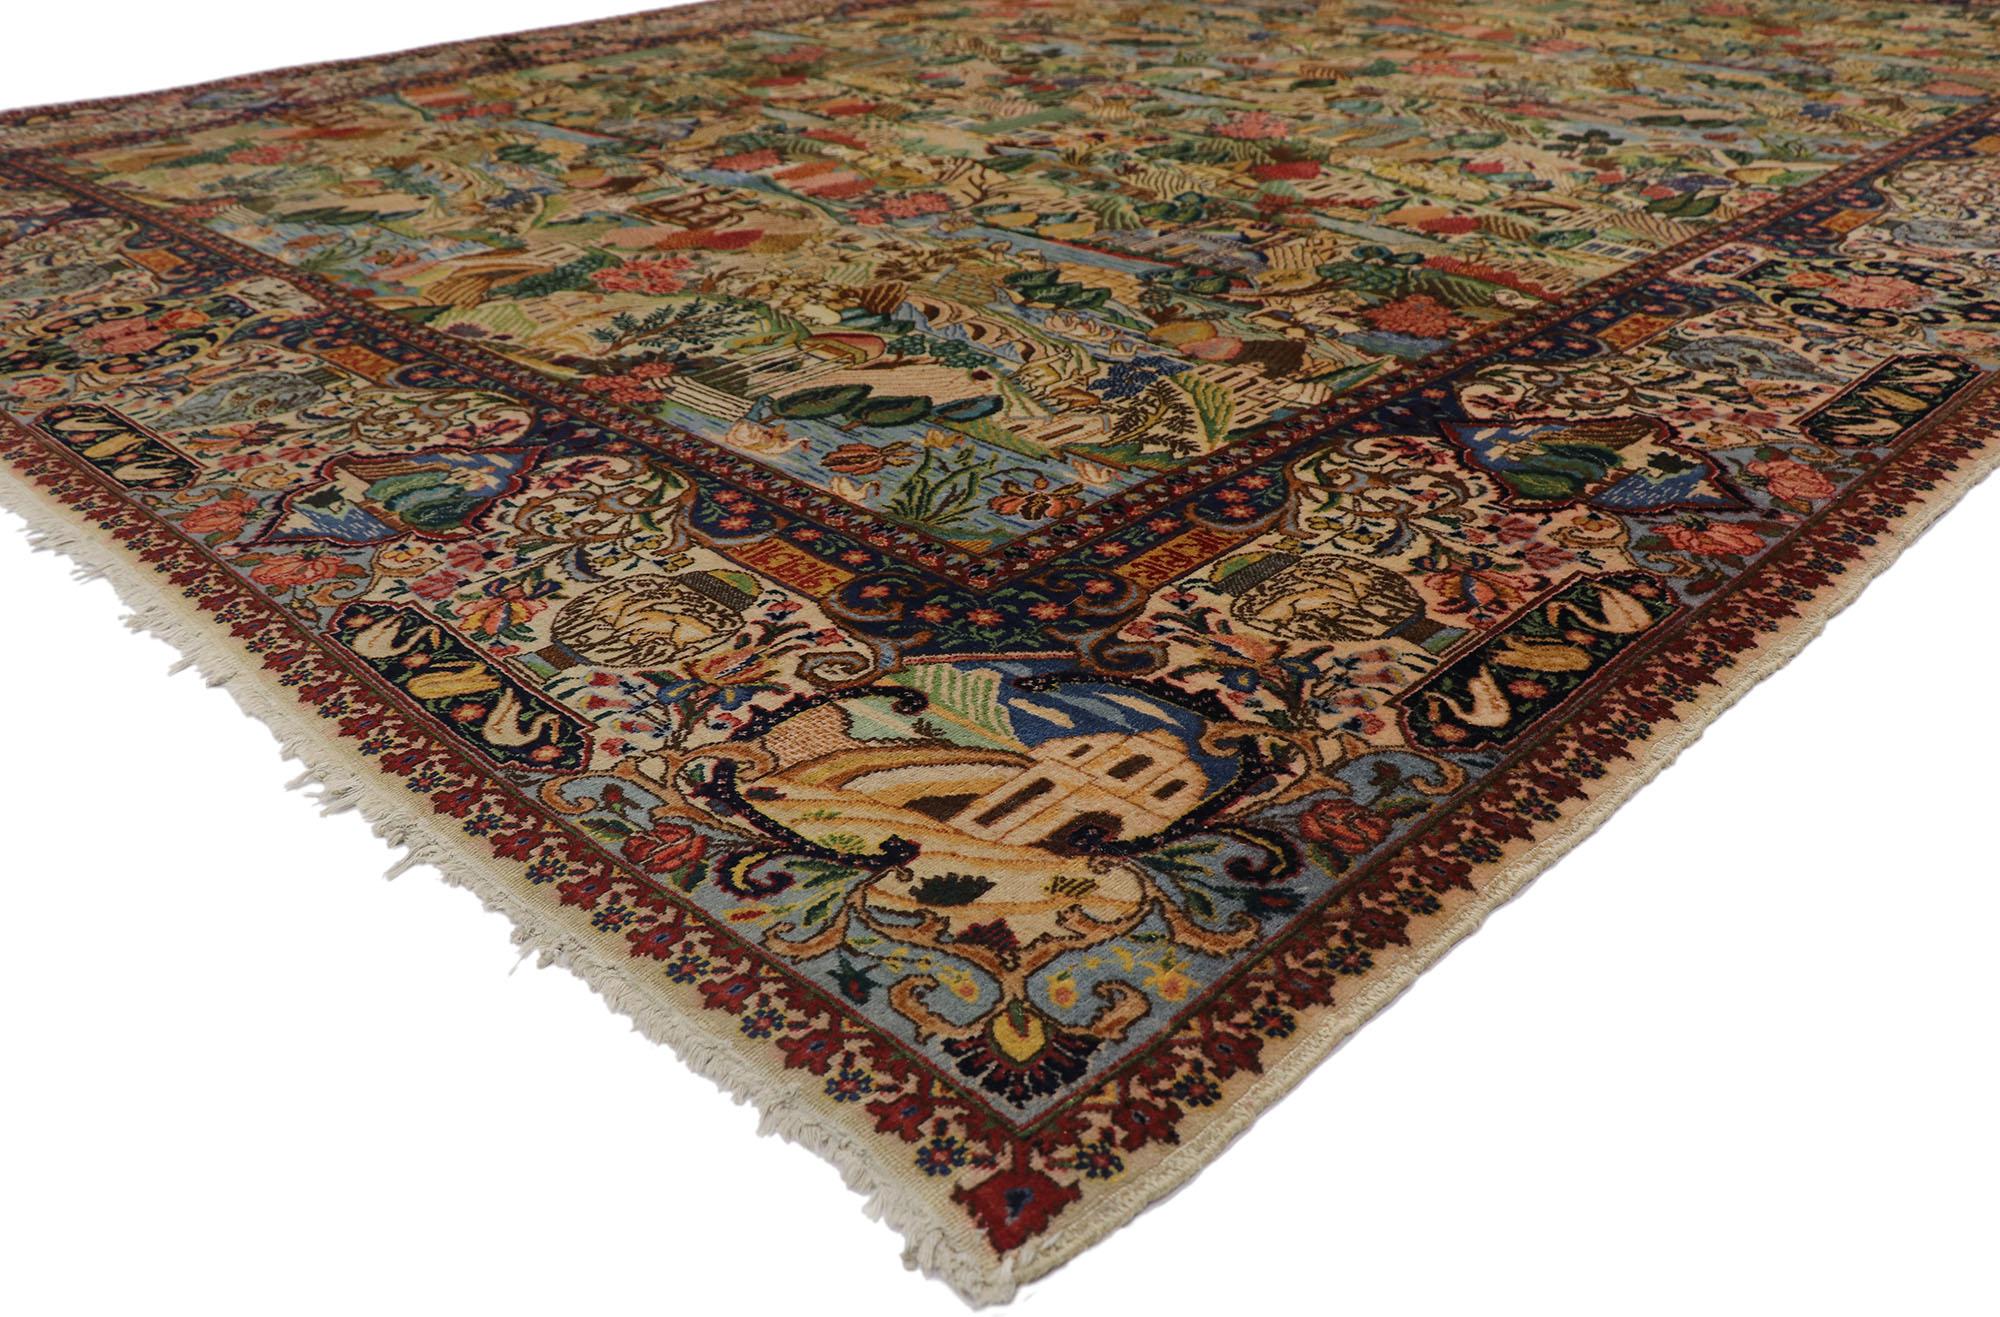 77660 antique Persian Tabriz Village Pictorial rug with signature 11'02 x 14'07. Full of tiny details with a village scene, this hand-knotted wool antique Persian Tabriz pictorial rug depicts many aspects of everyday village and rural life. With the